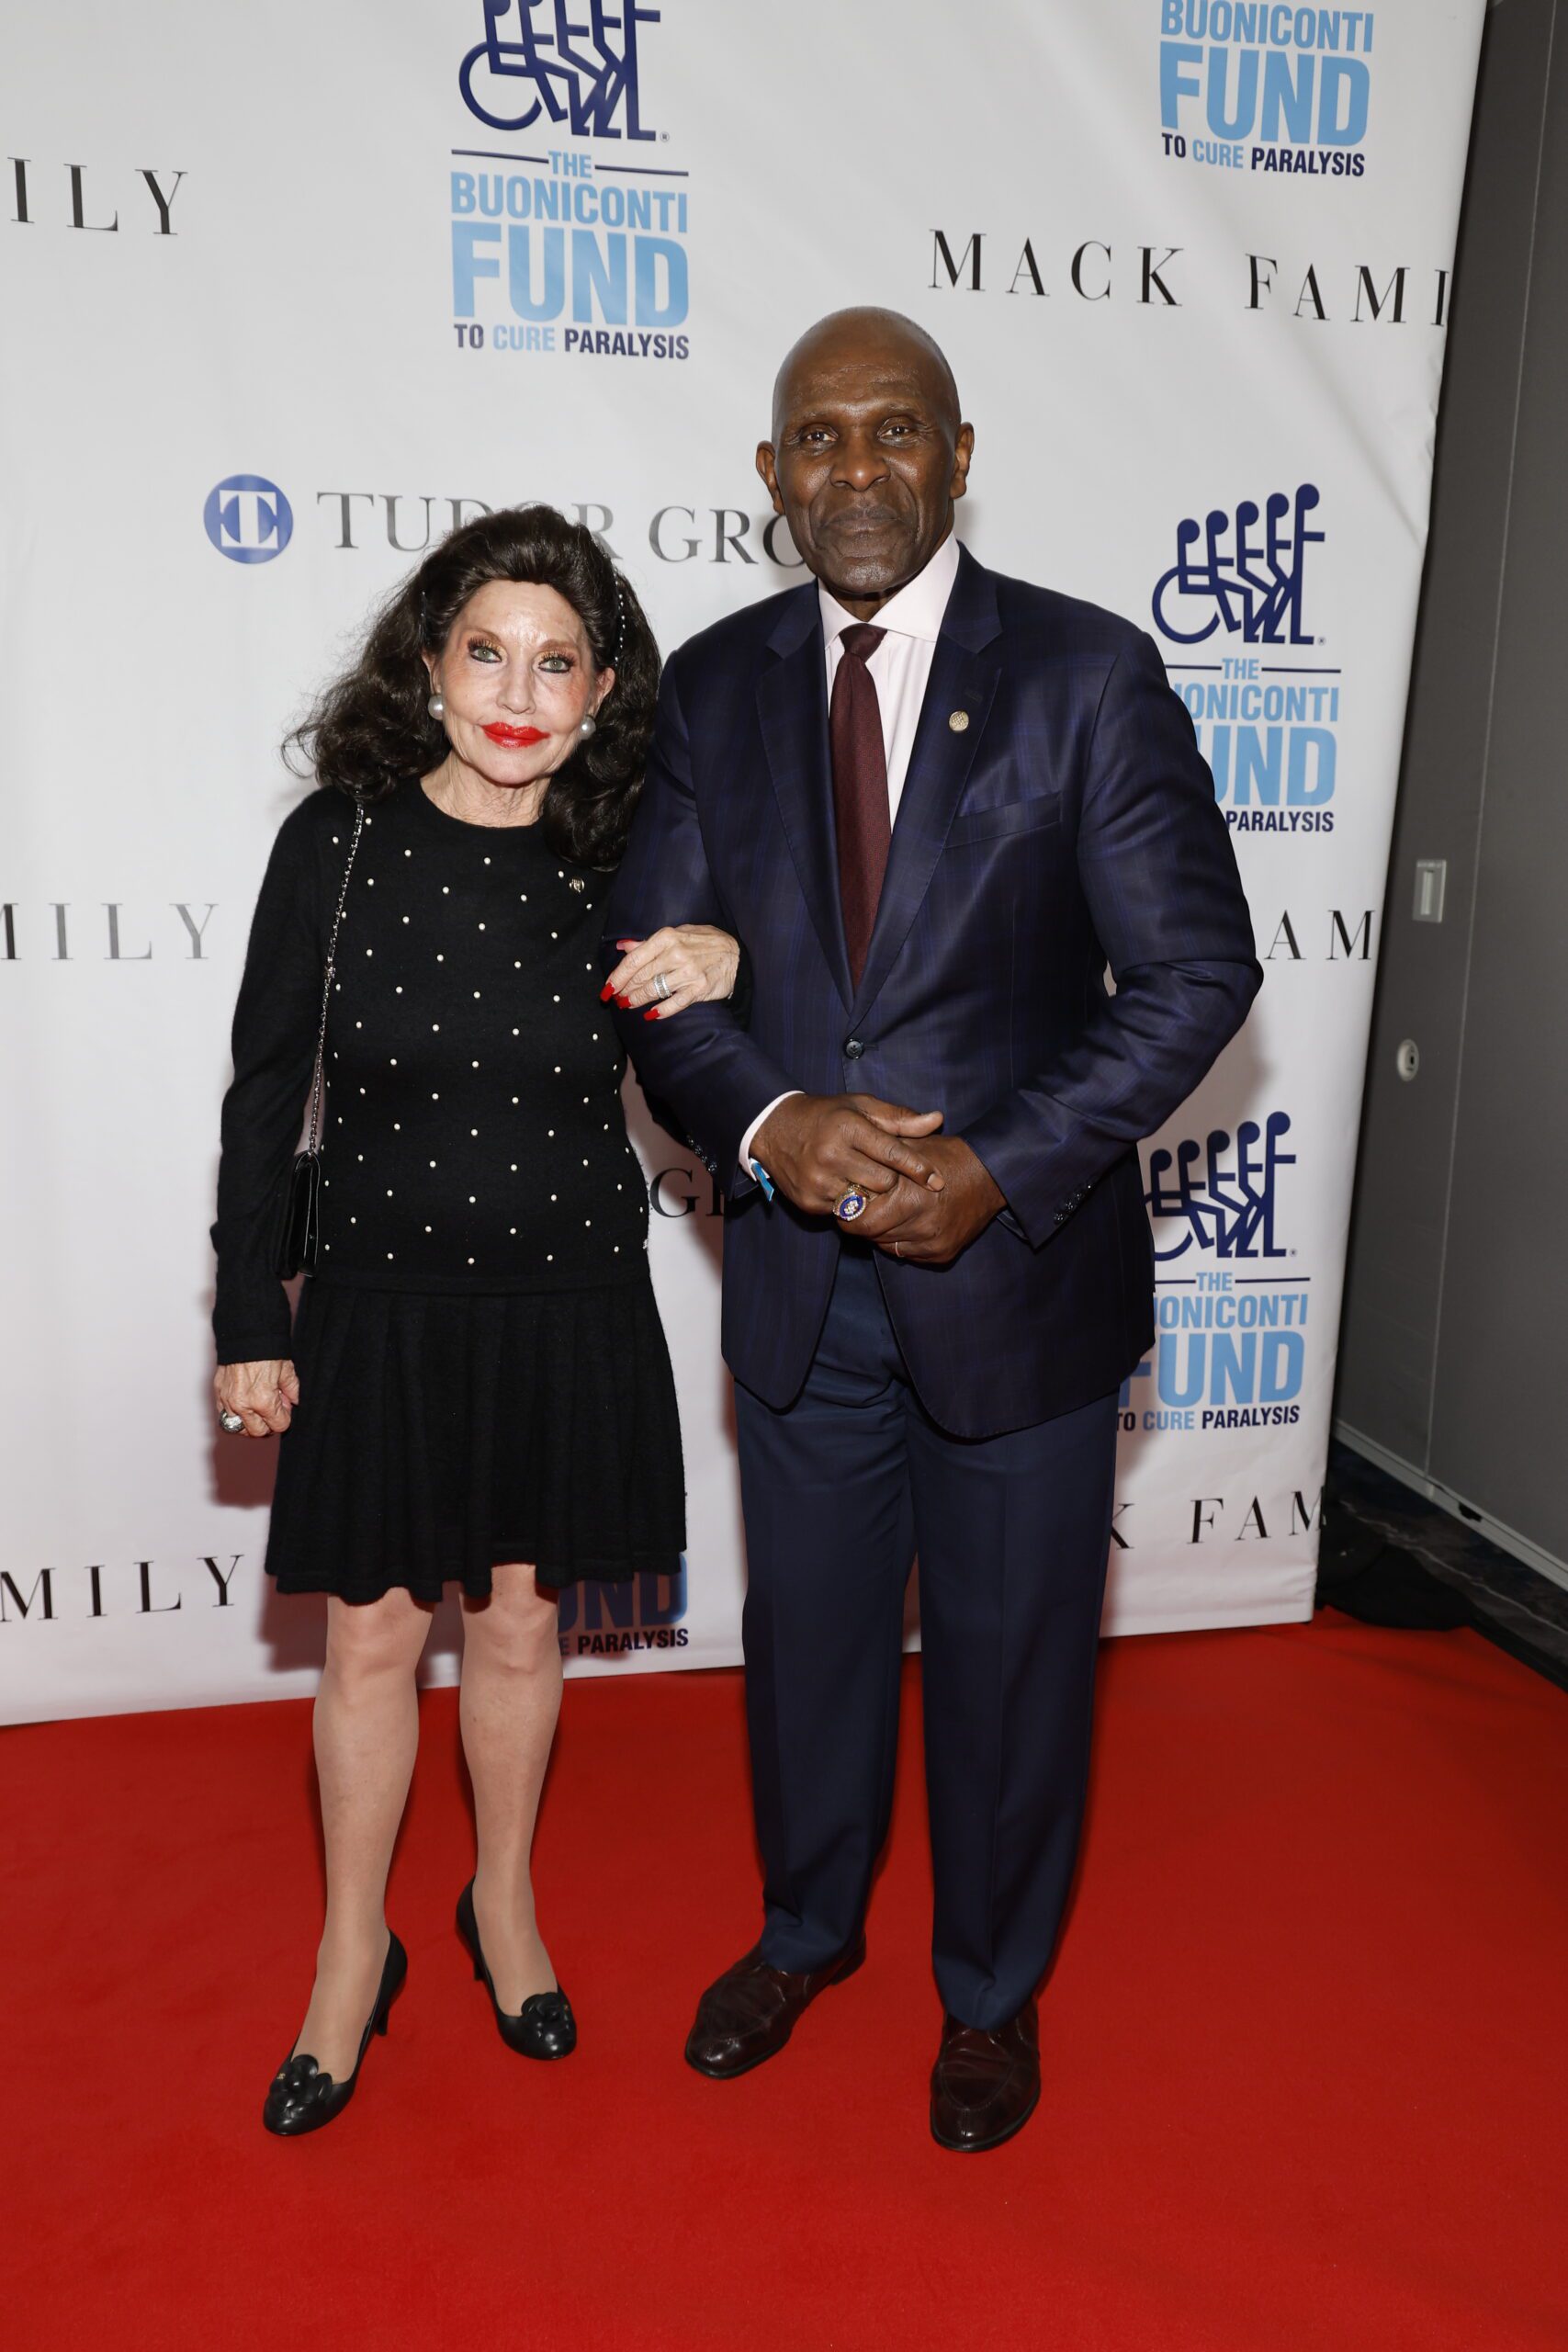 Christine E. Lynn and Harry Carson (Photo by Mike Coppola/Getty Images for The Buoniconti Fund to Cure Paralysis)